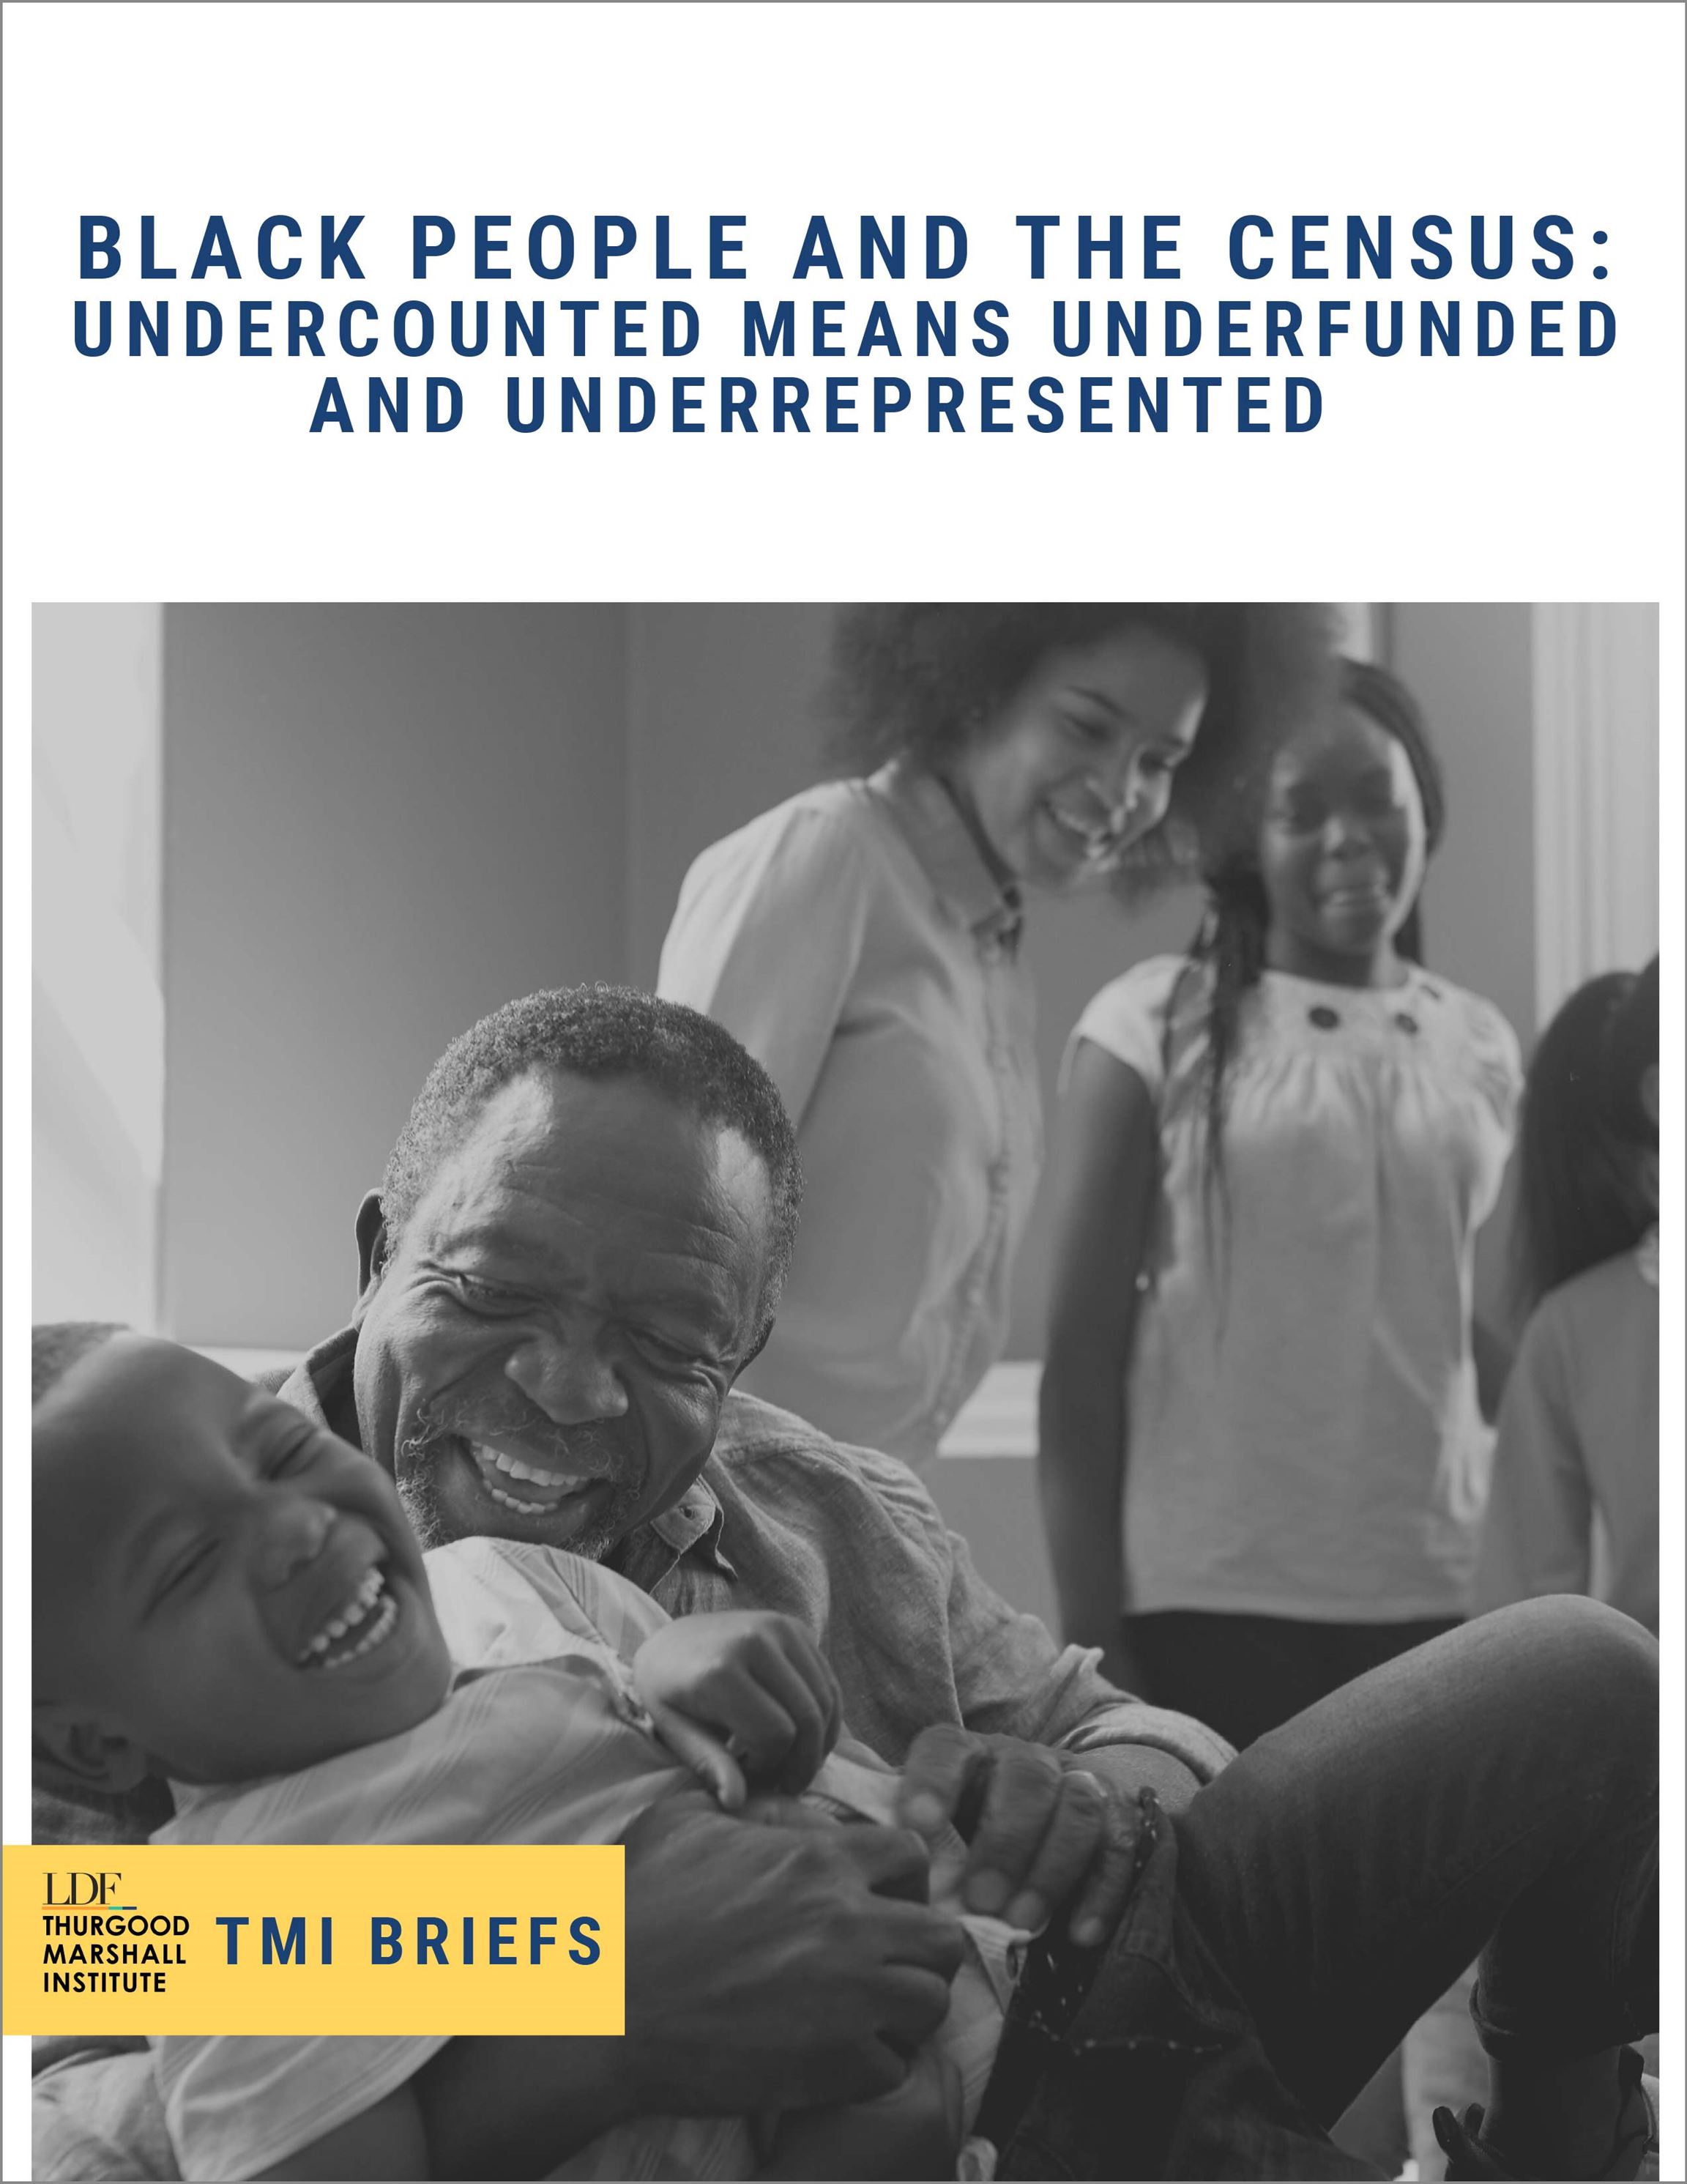 Brochure cover for "Black People and the Census" featuring an image of a man and his young granddaughter laughing while other family members look on